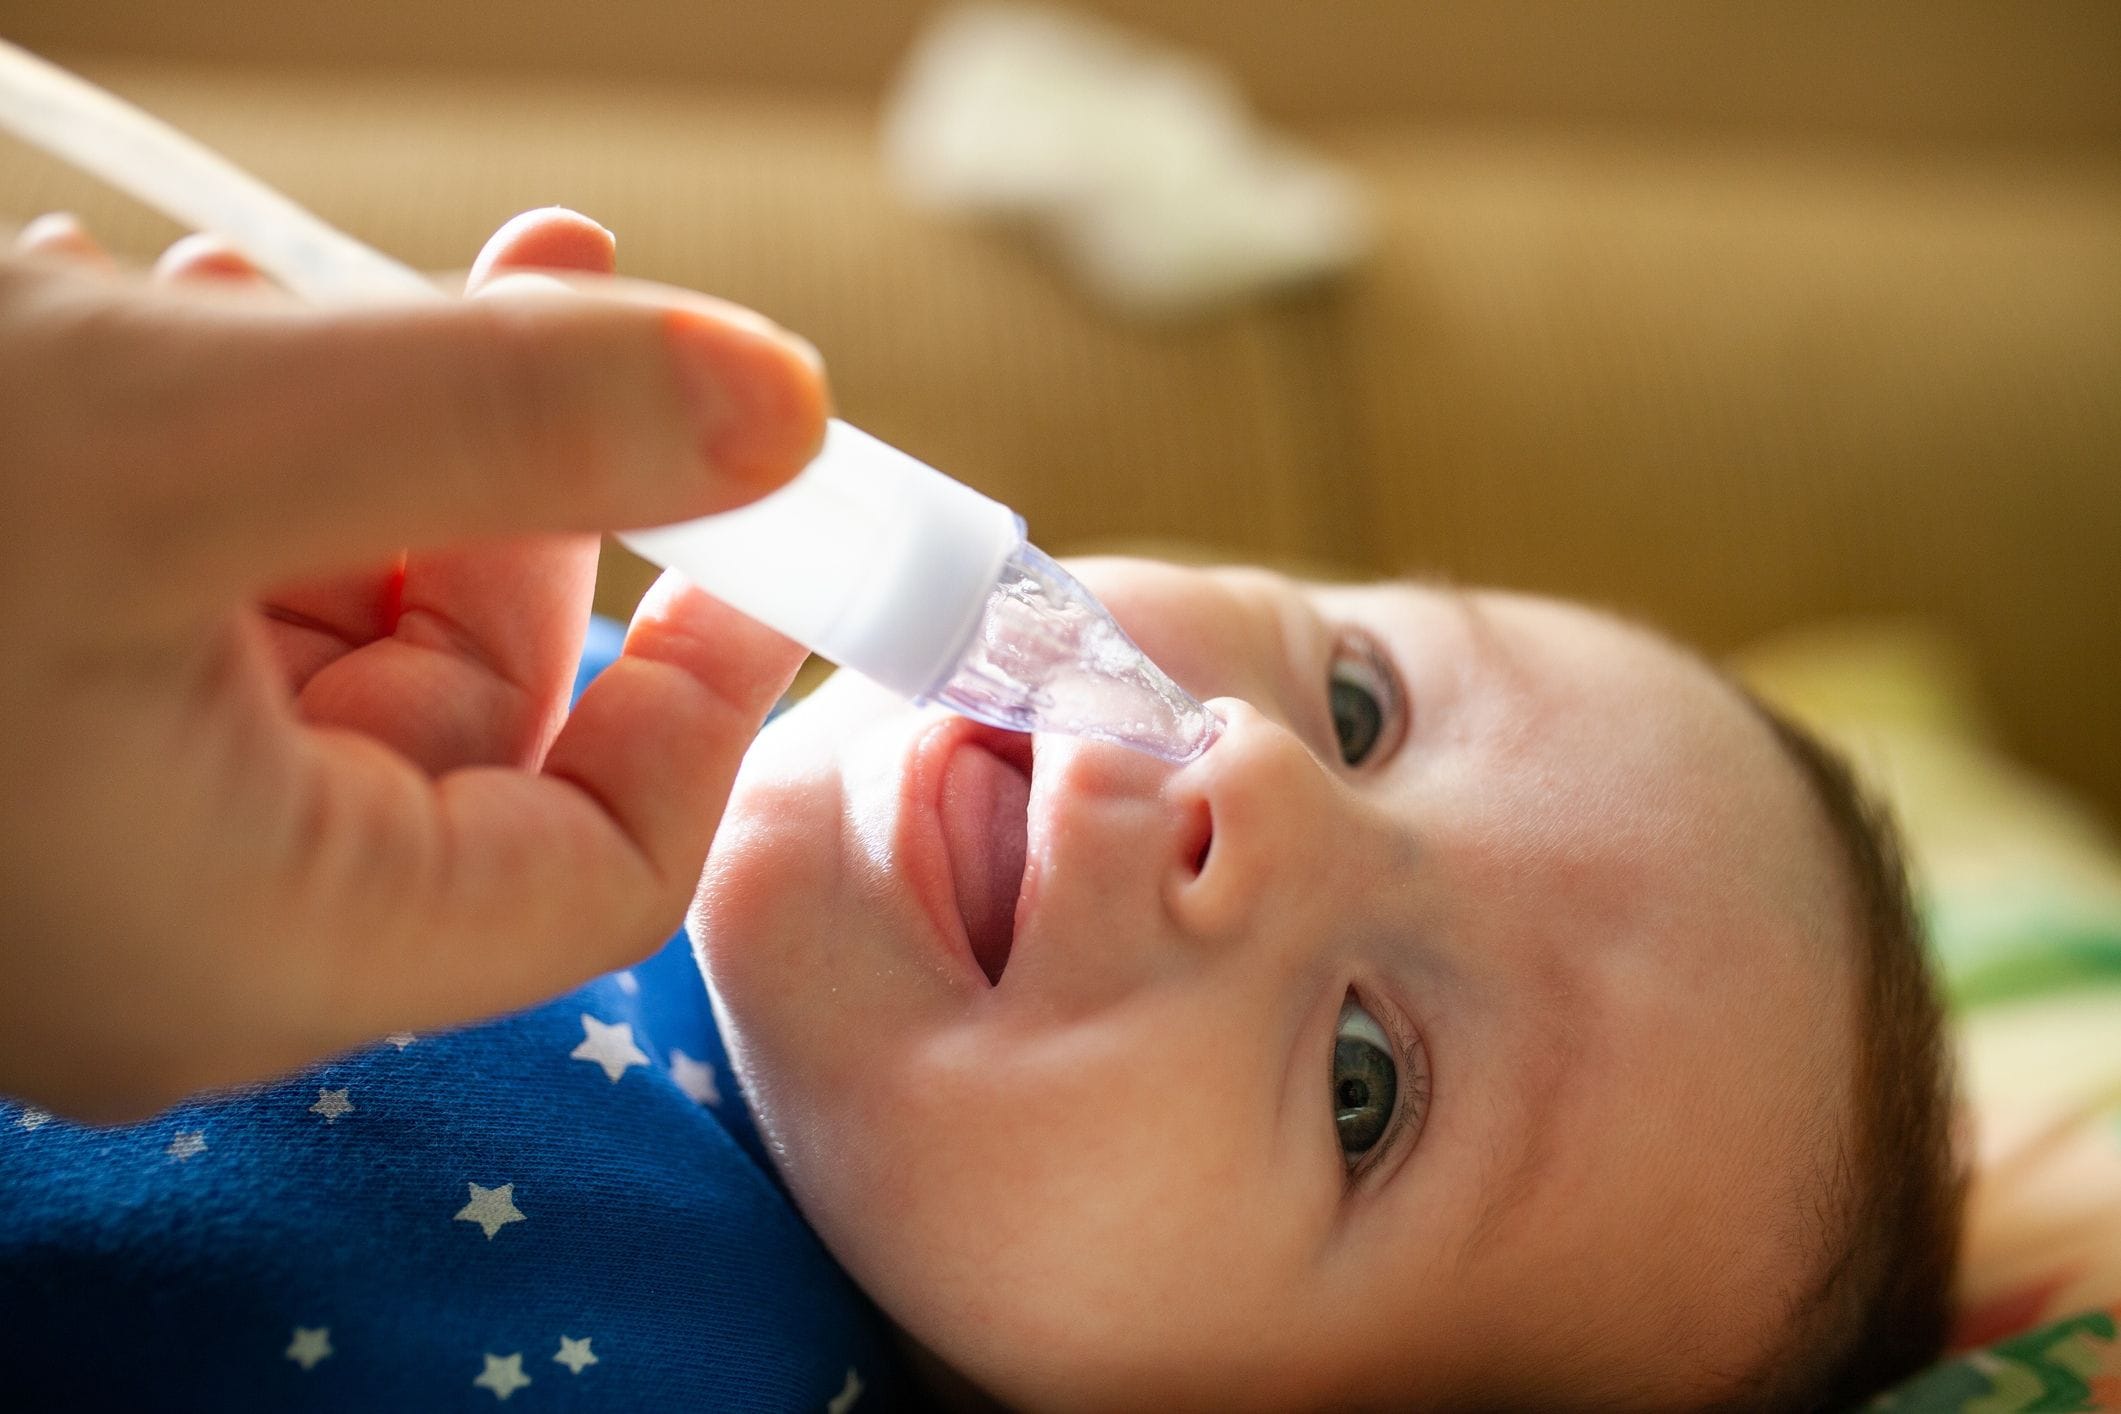 Weird Health: Is This Baby Nose Sucker a Great Idea or Sort of